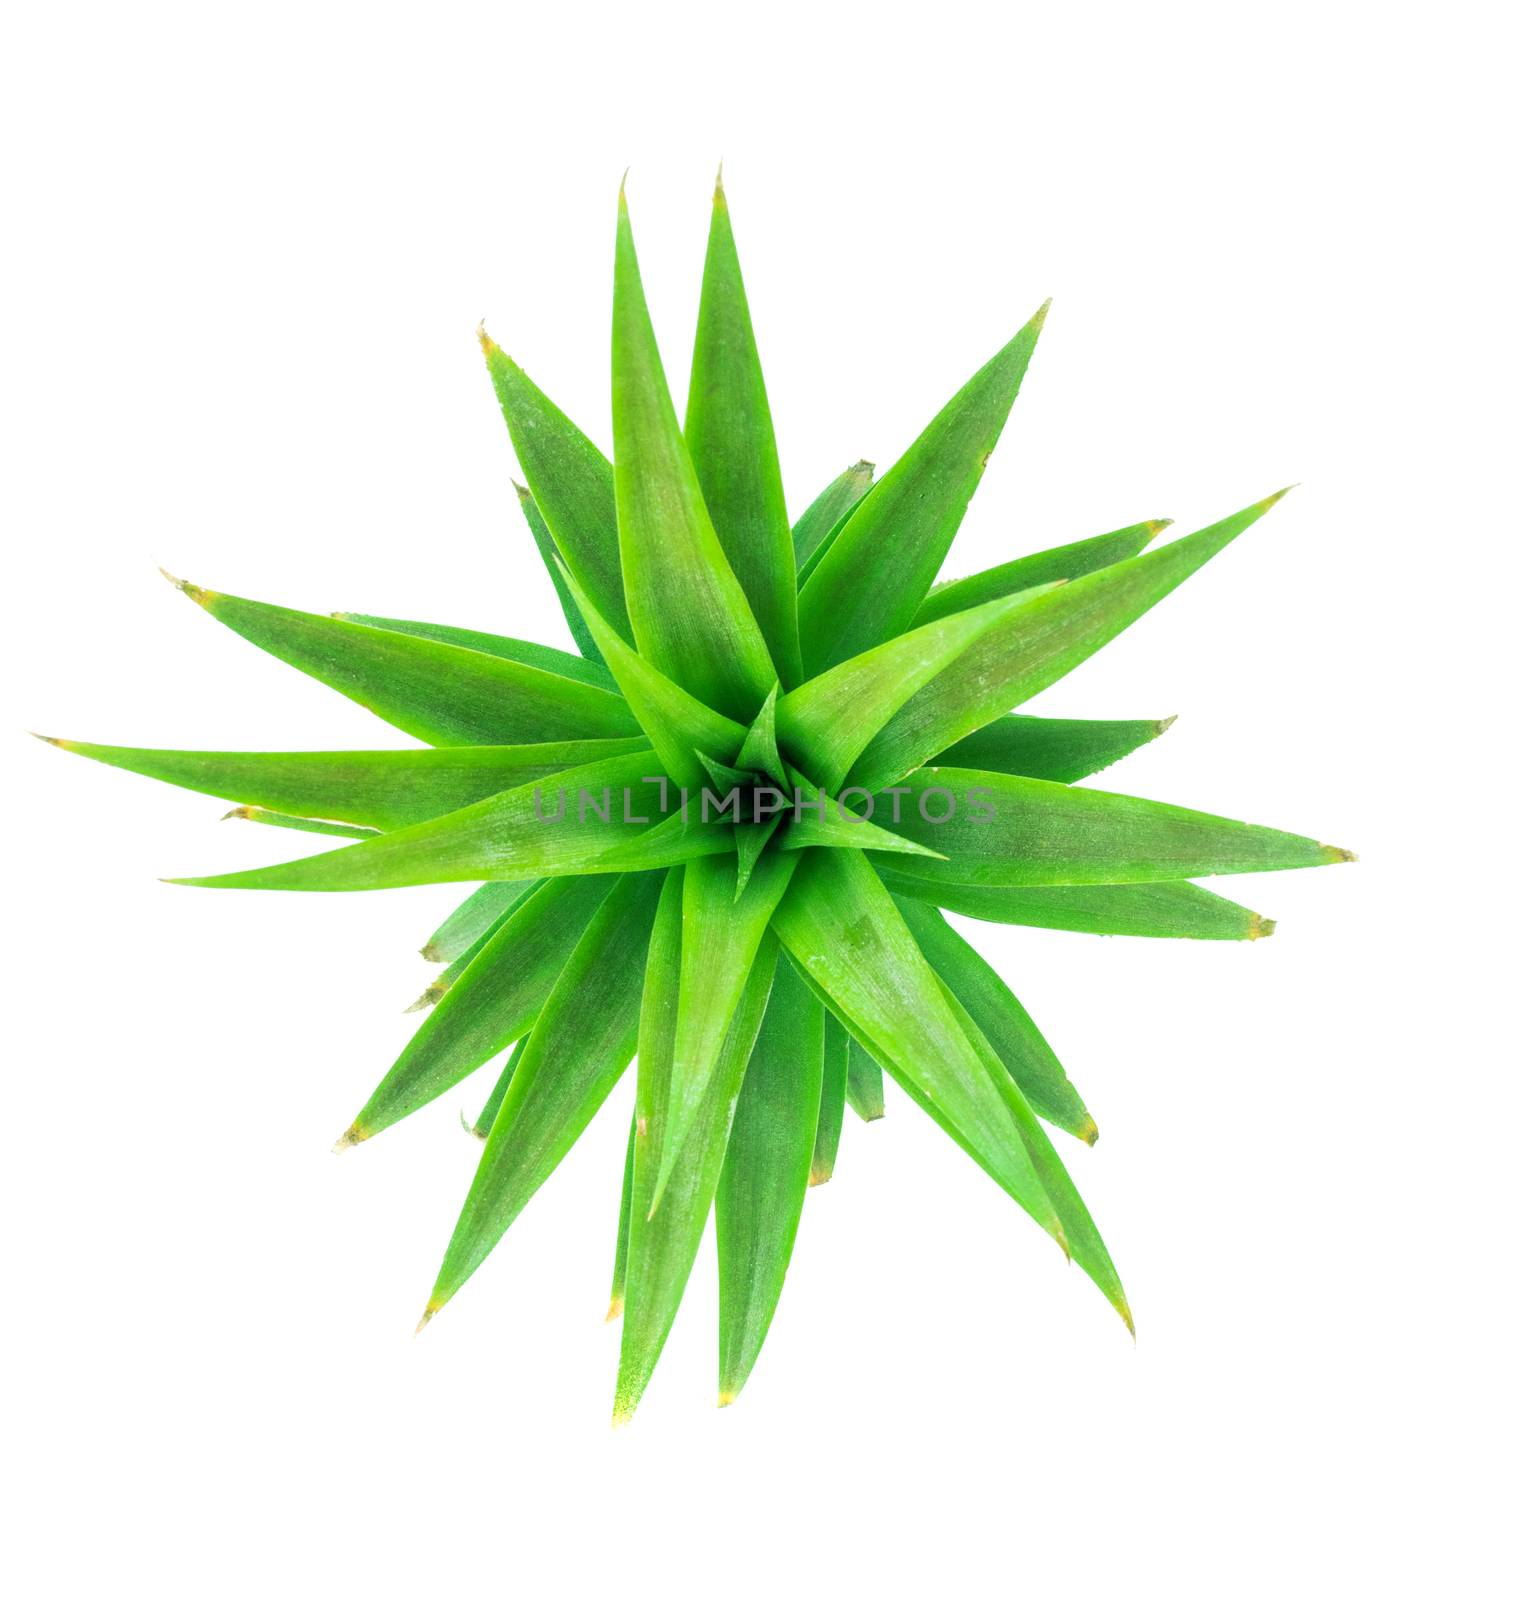 The soft leaves of pineapple on white background